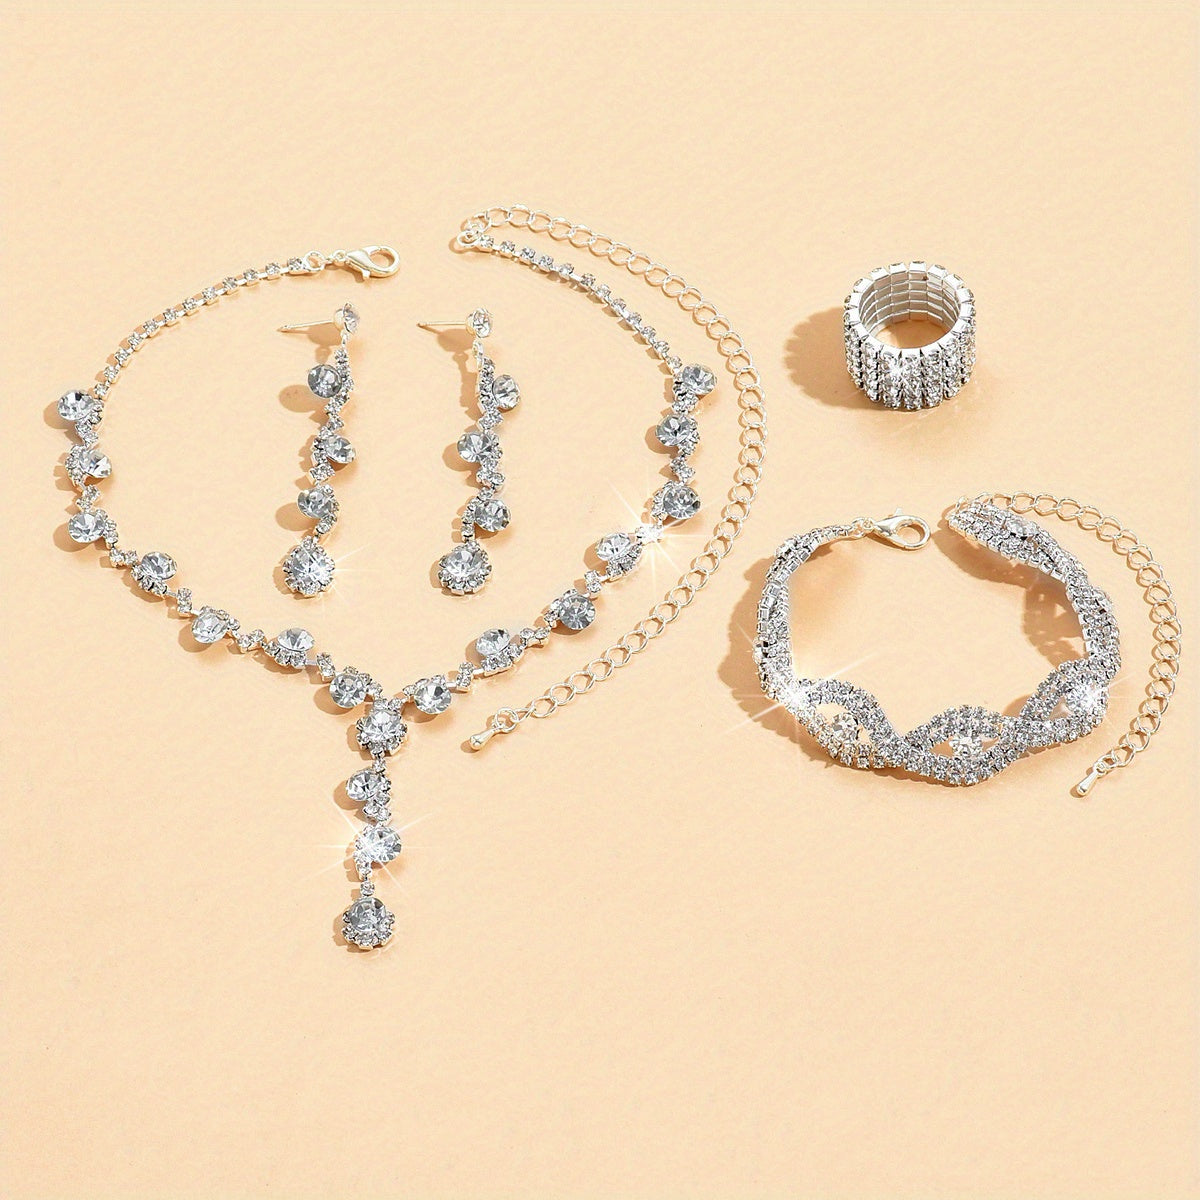 5pcs Silver Plated Rhinestone Jewelry Set with Devil Eye Design - Perfect for Evening Parties